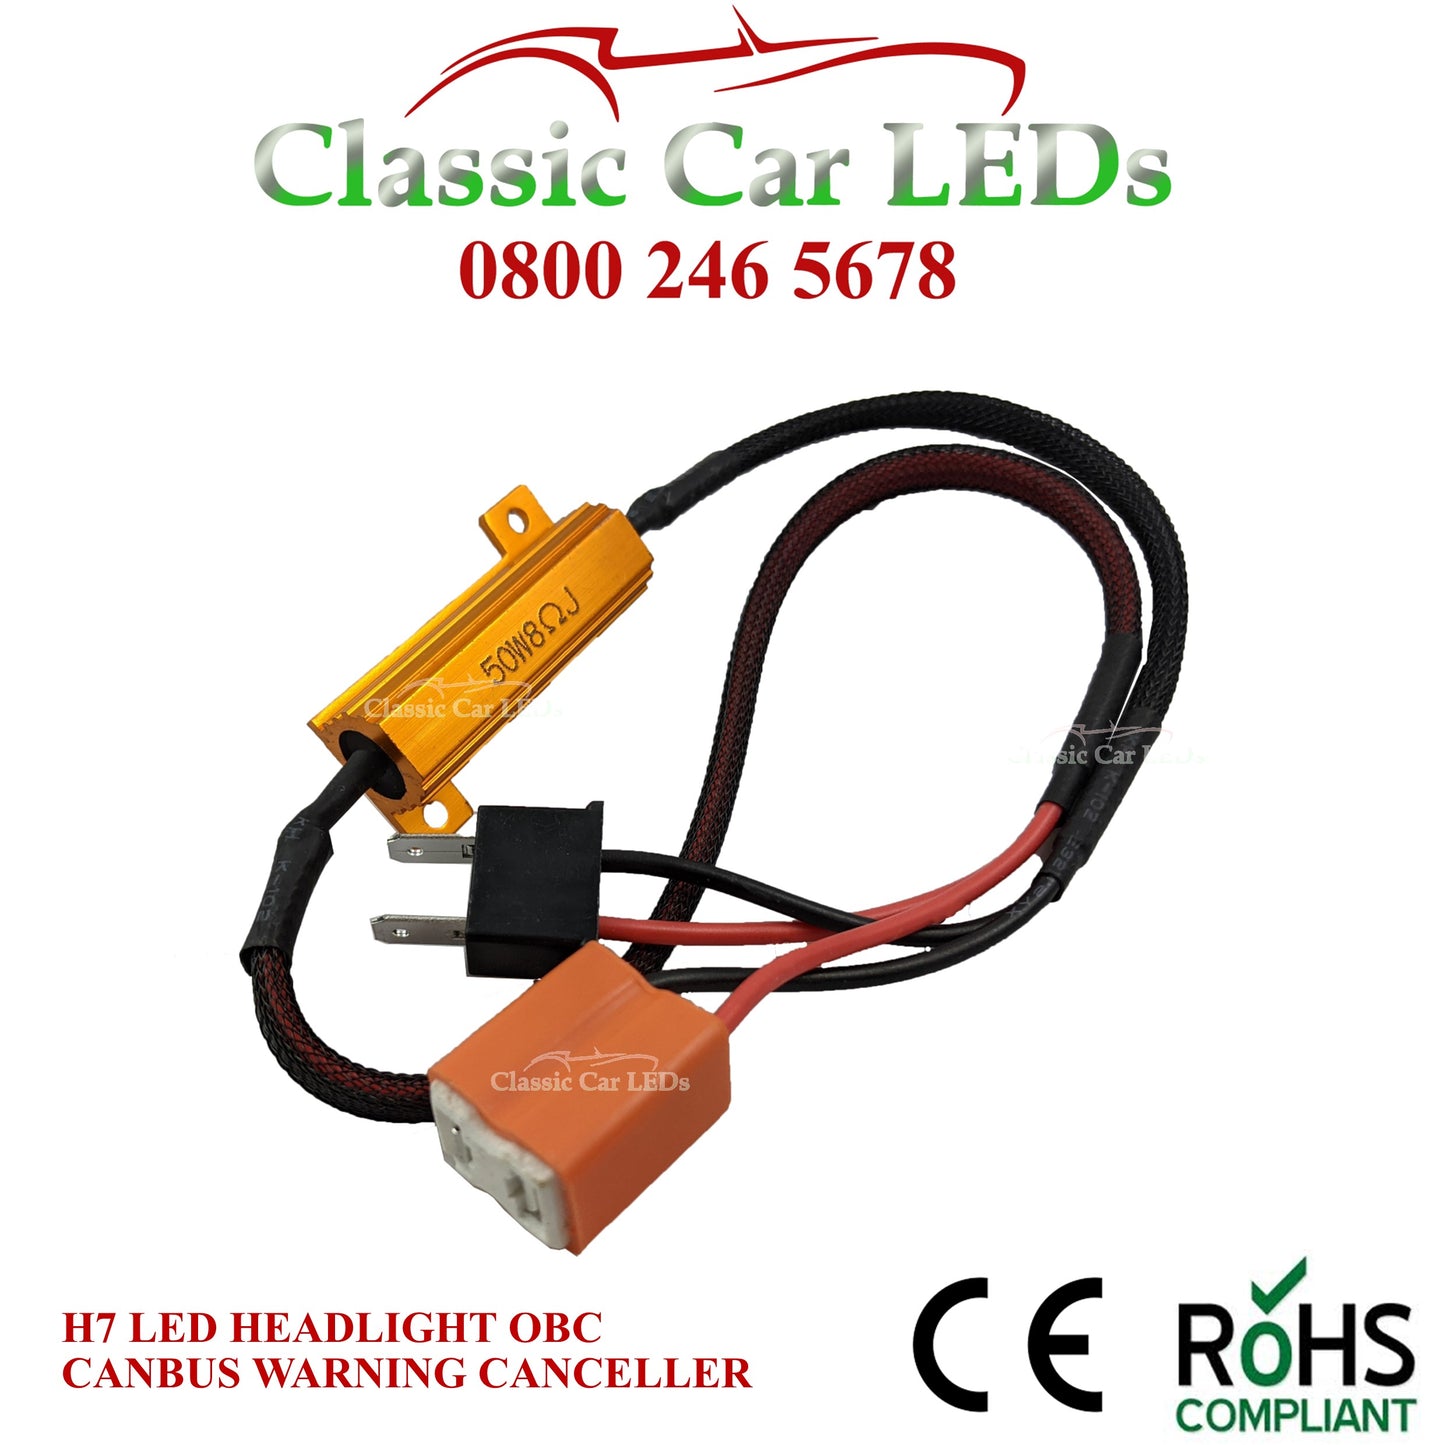 1 x H7 LED HEADLIGHT CANBUS OBC WARNING CANCELLER 50W 6Ohm Load Resistor